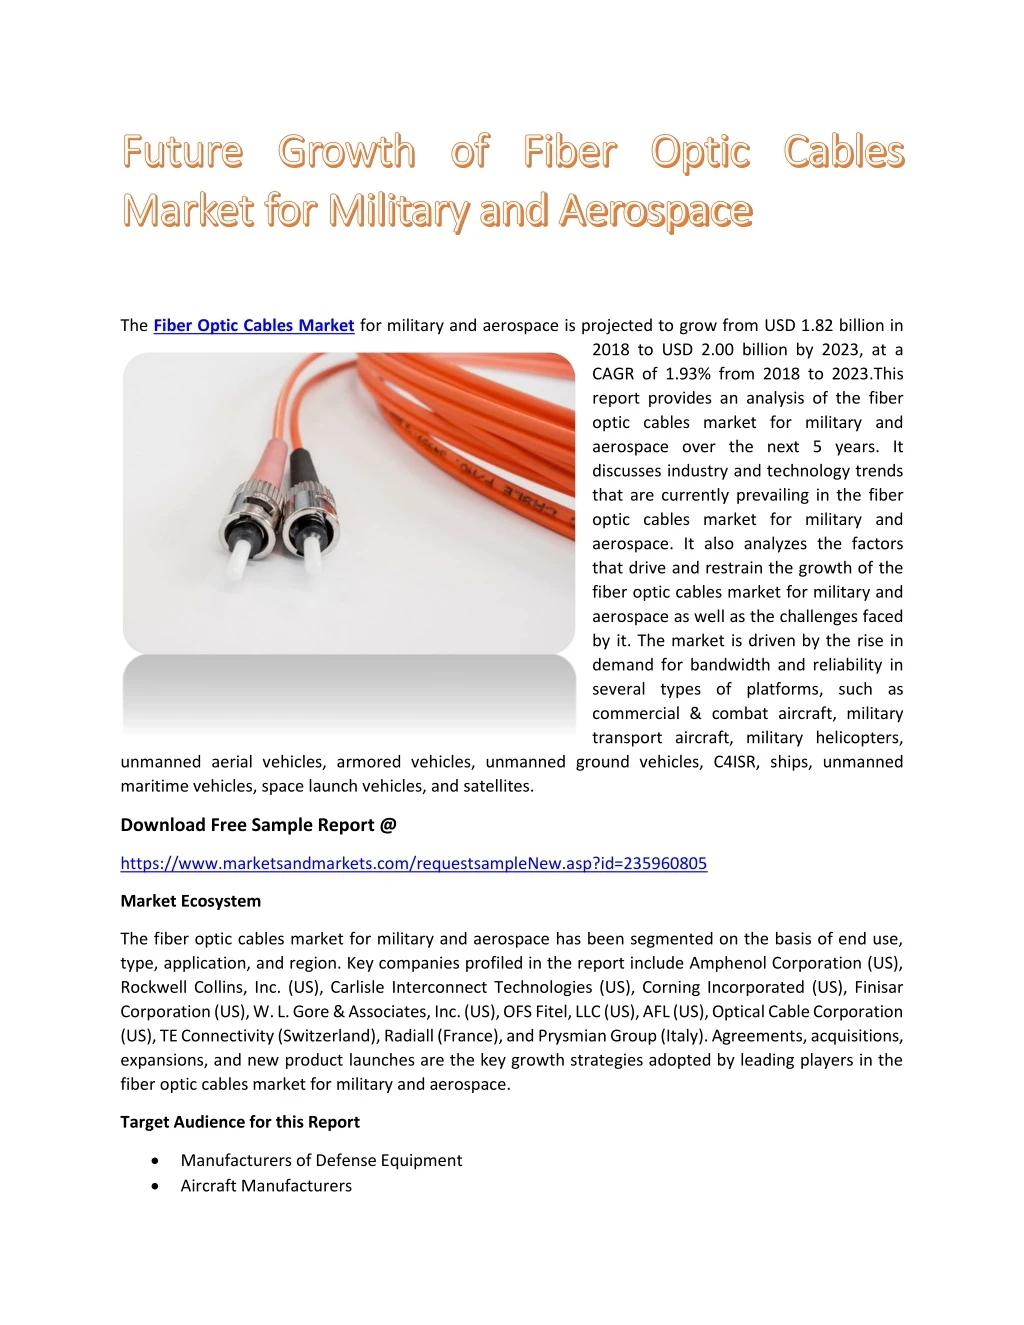 the fiber optic cables market for military